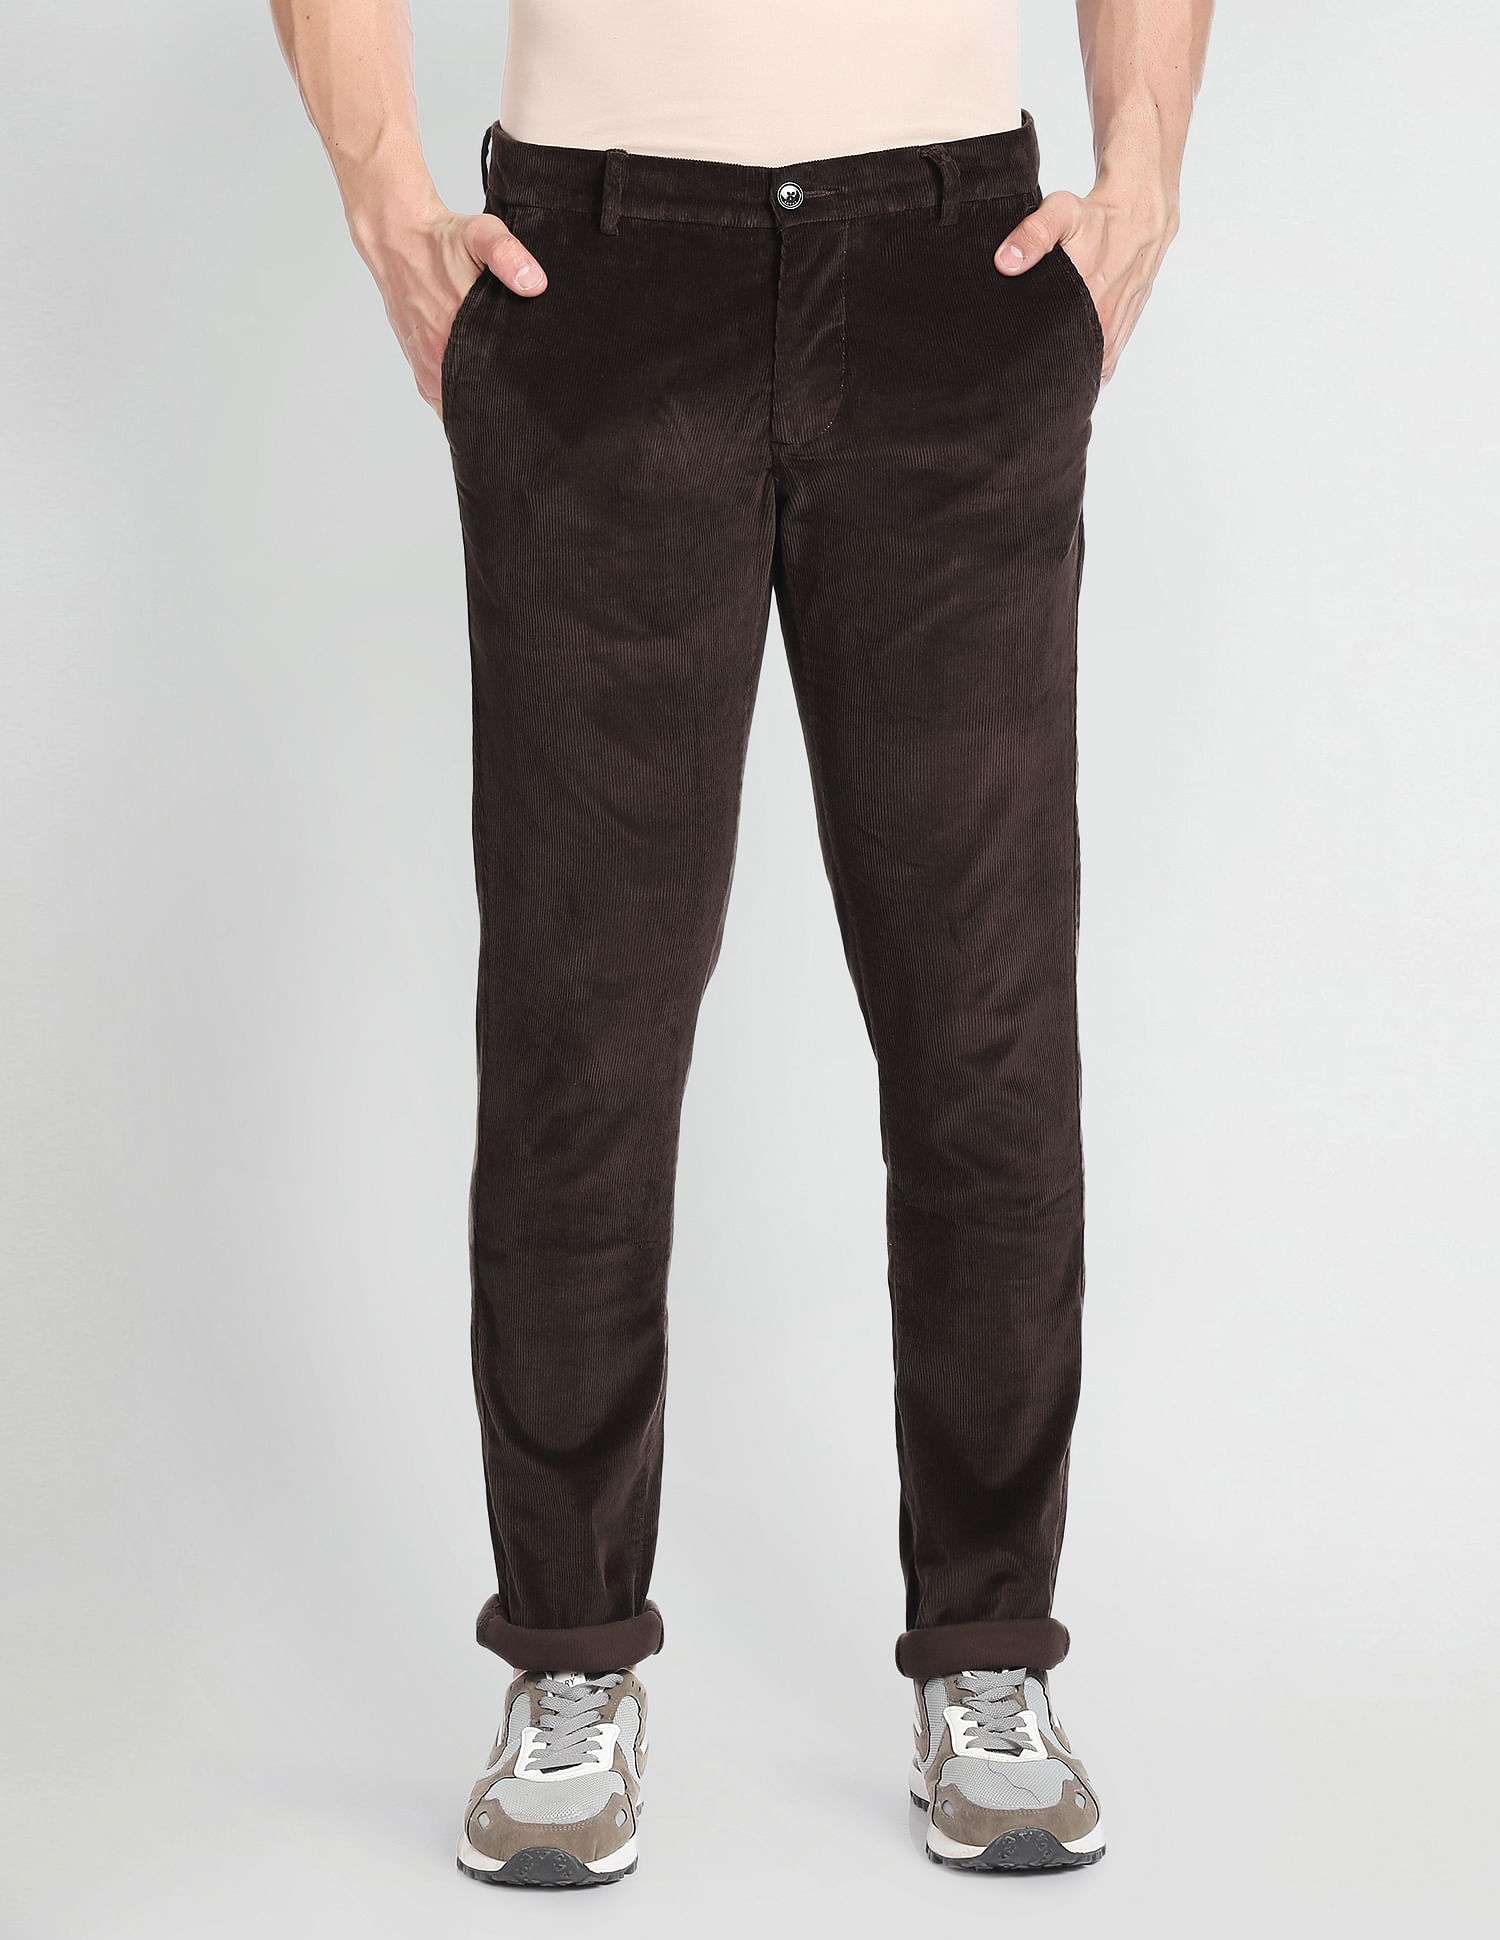 Buy BLACKBERRYS Mens Skinny Fit 4 Pocket Solid Chinos | Shoppers Stop